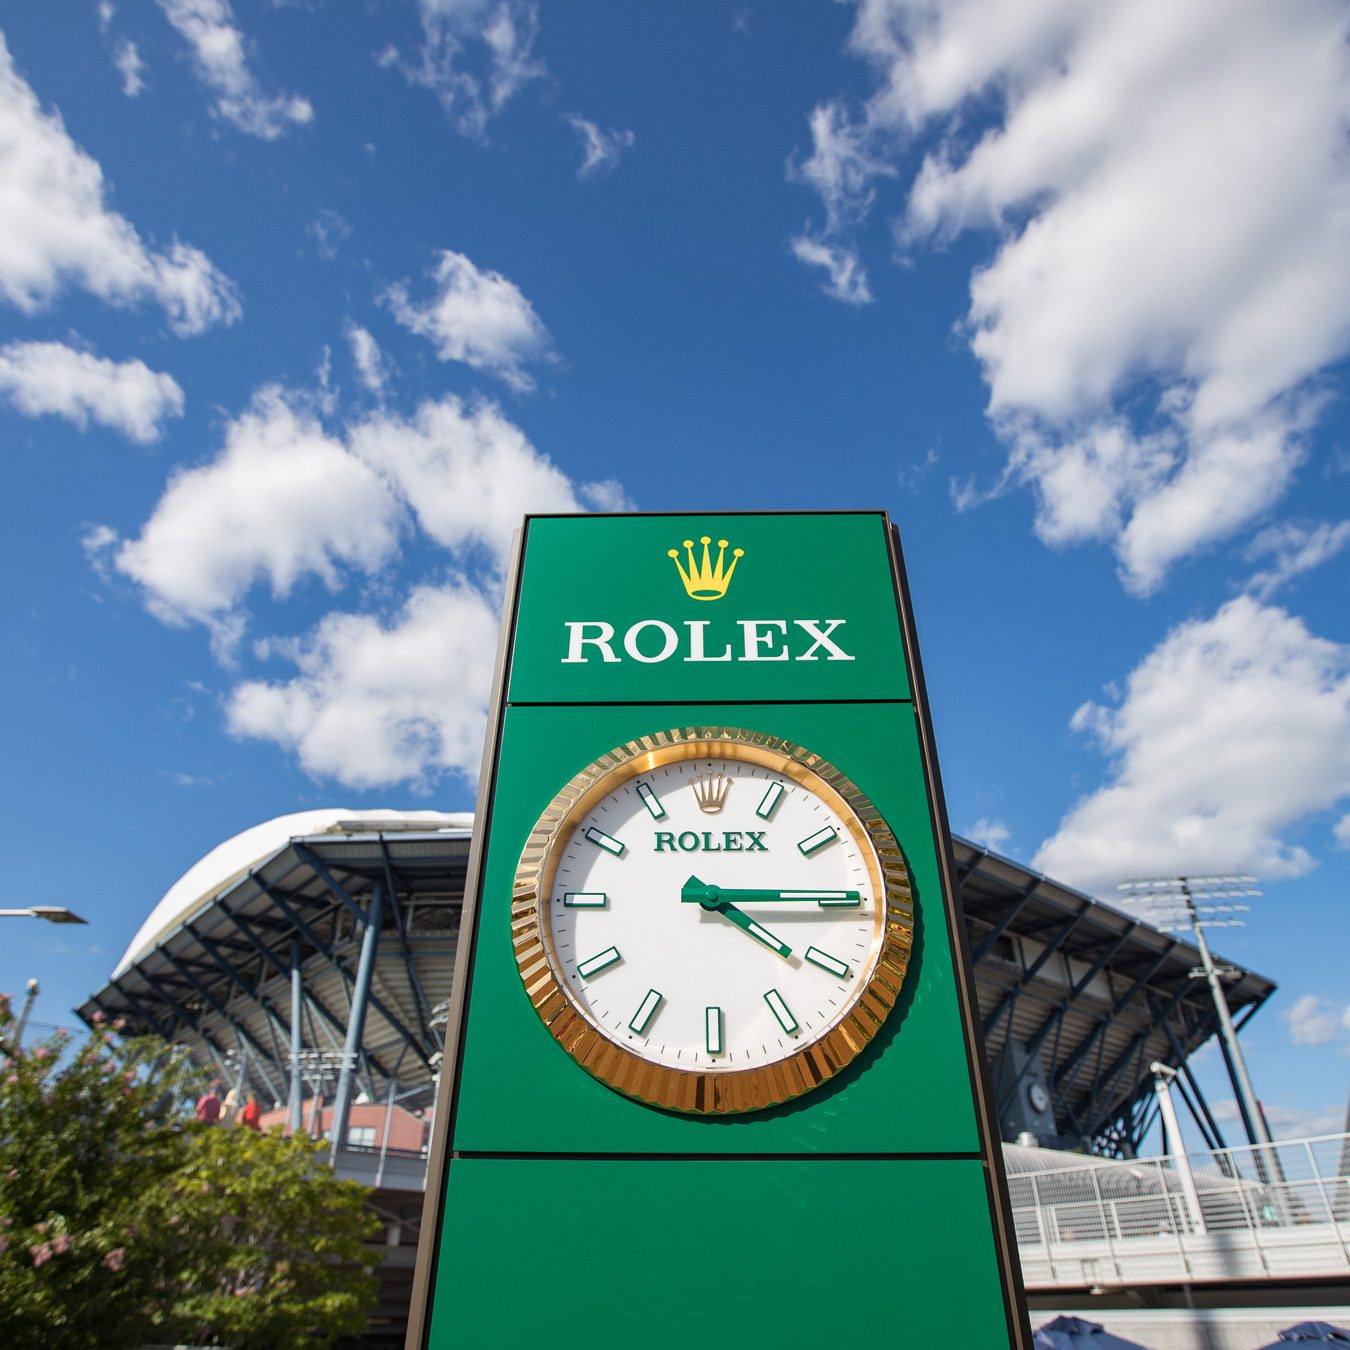 Rolex and Tennis, partners for over 45 years. Read more articles at laminedor.com.